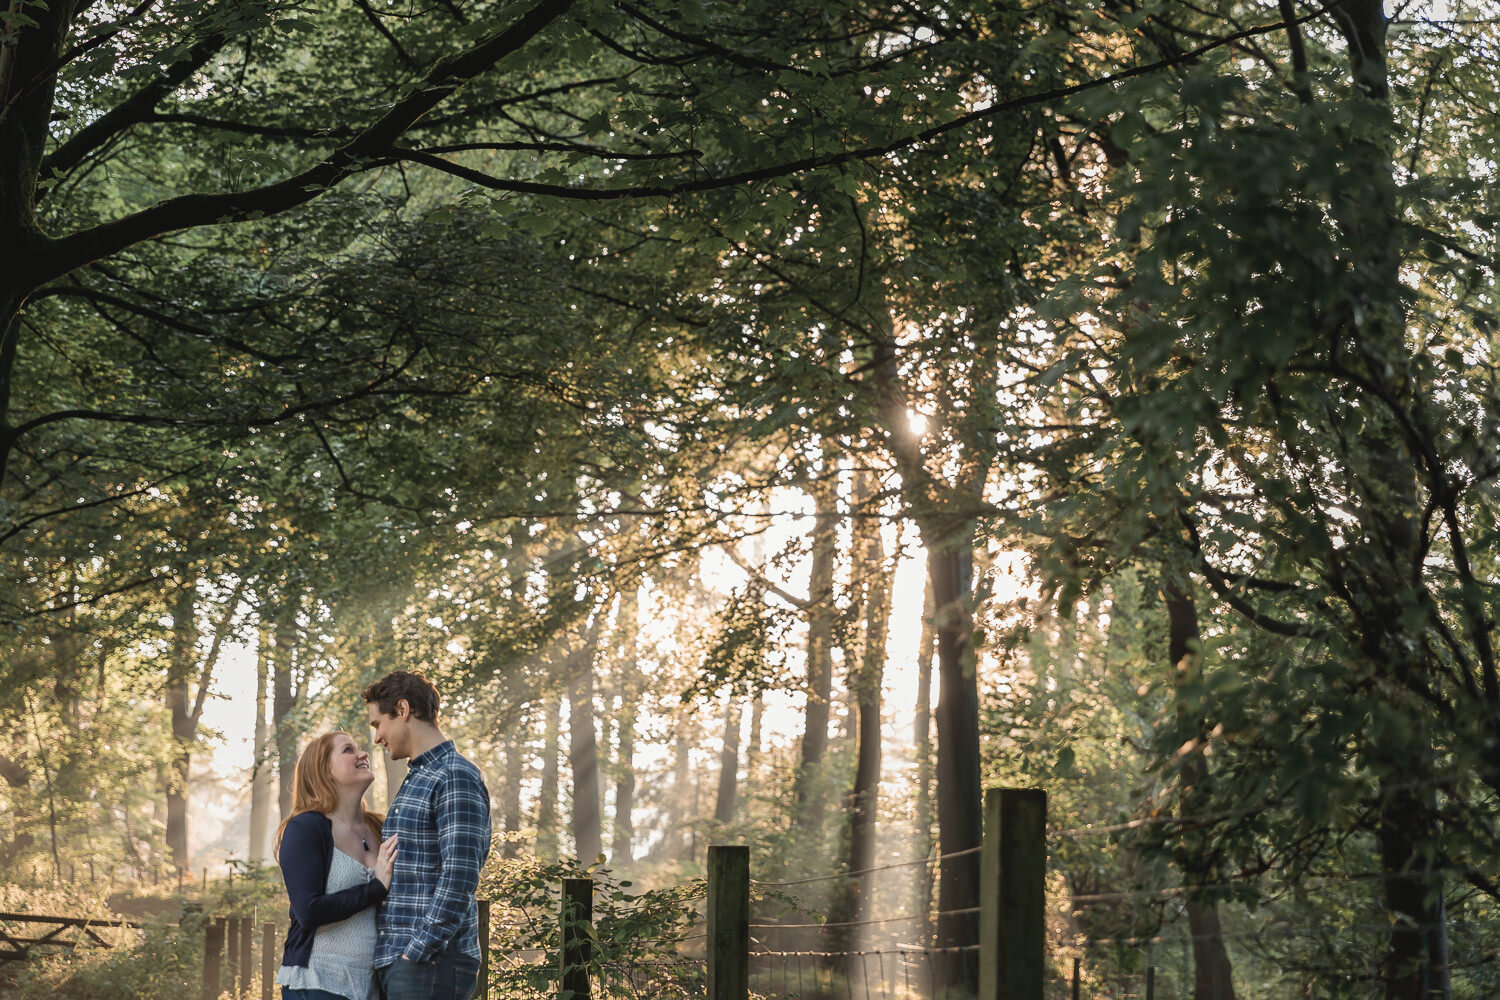 Cheshire-pre-wedding-photoshoot-in-the-forest-031.jpg